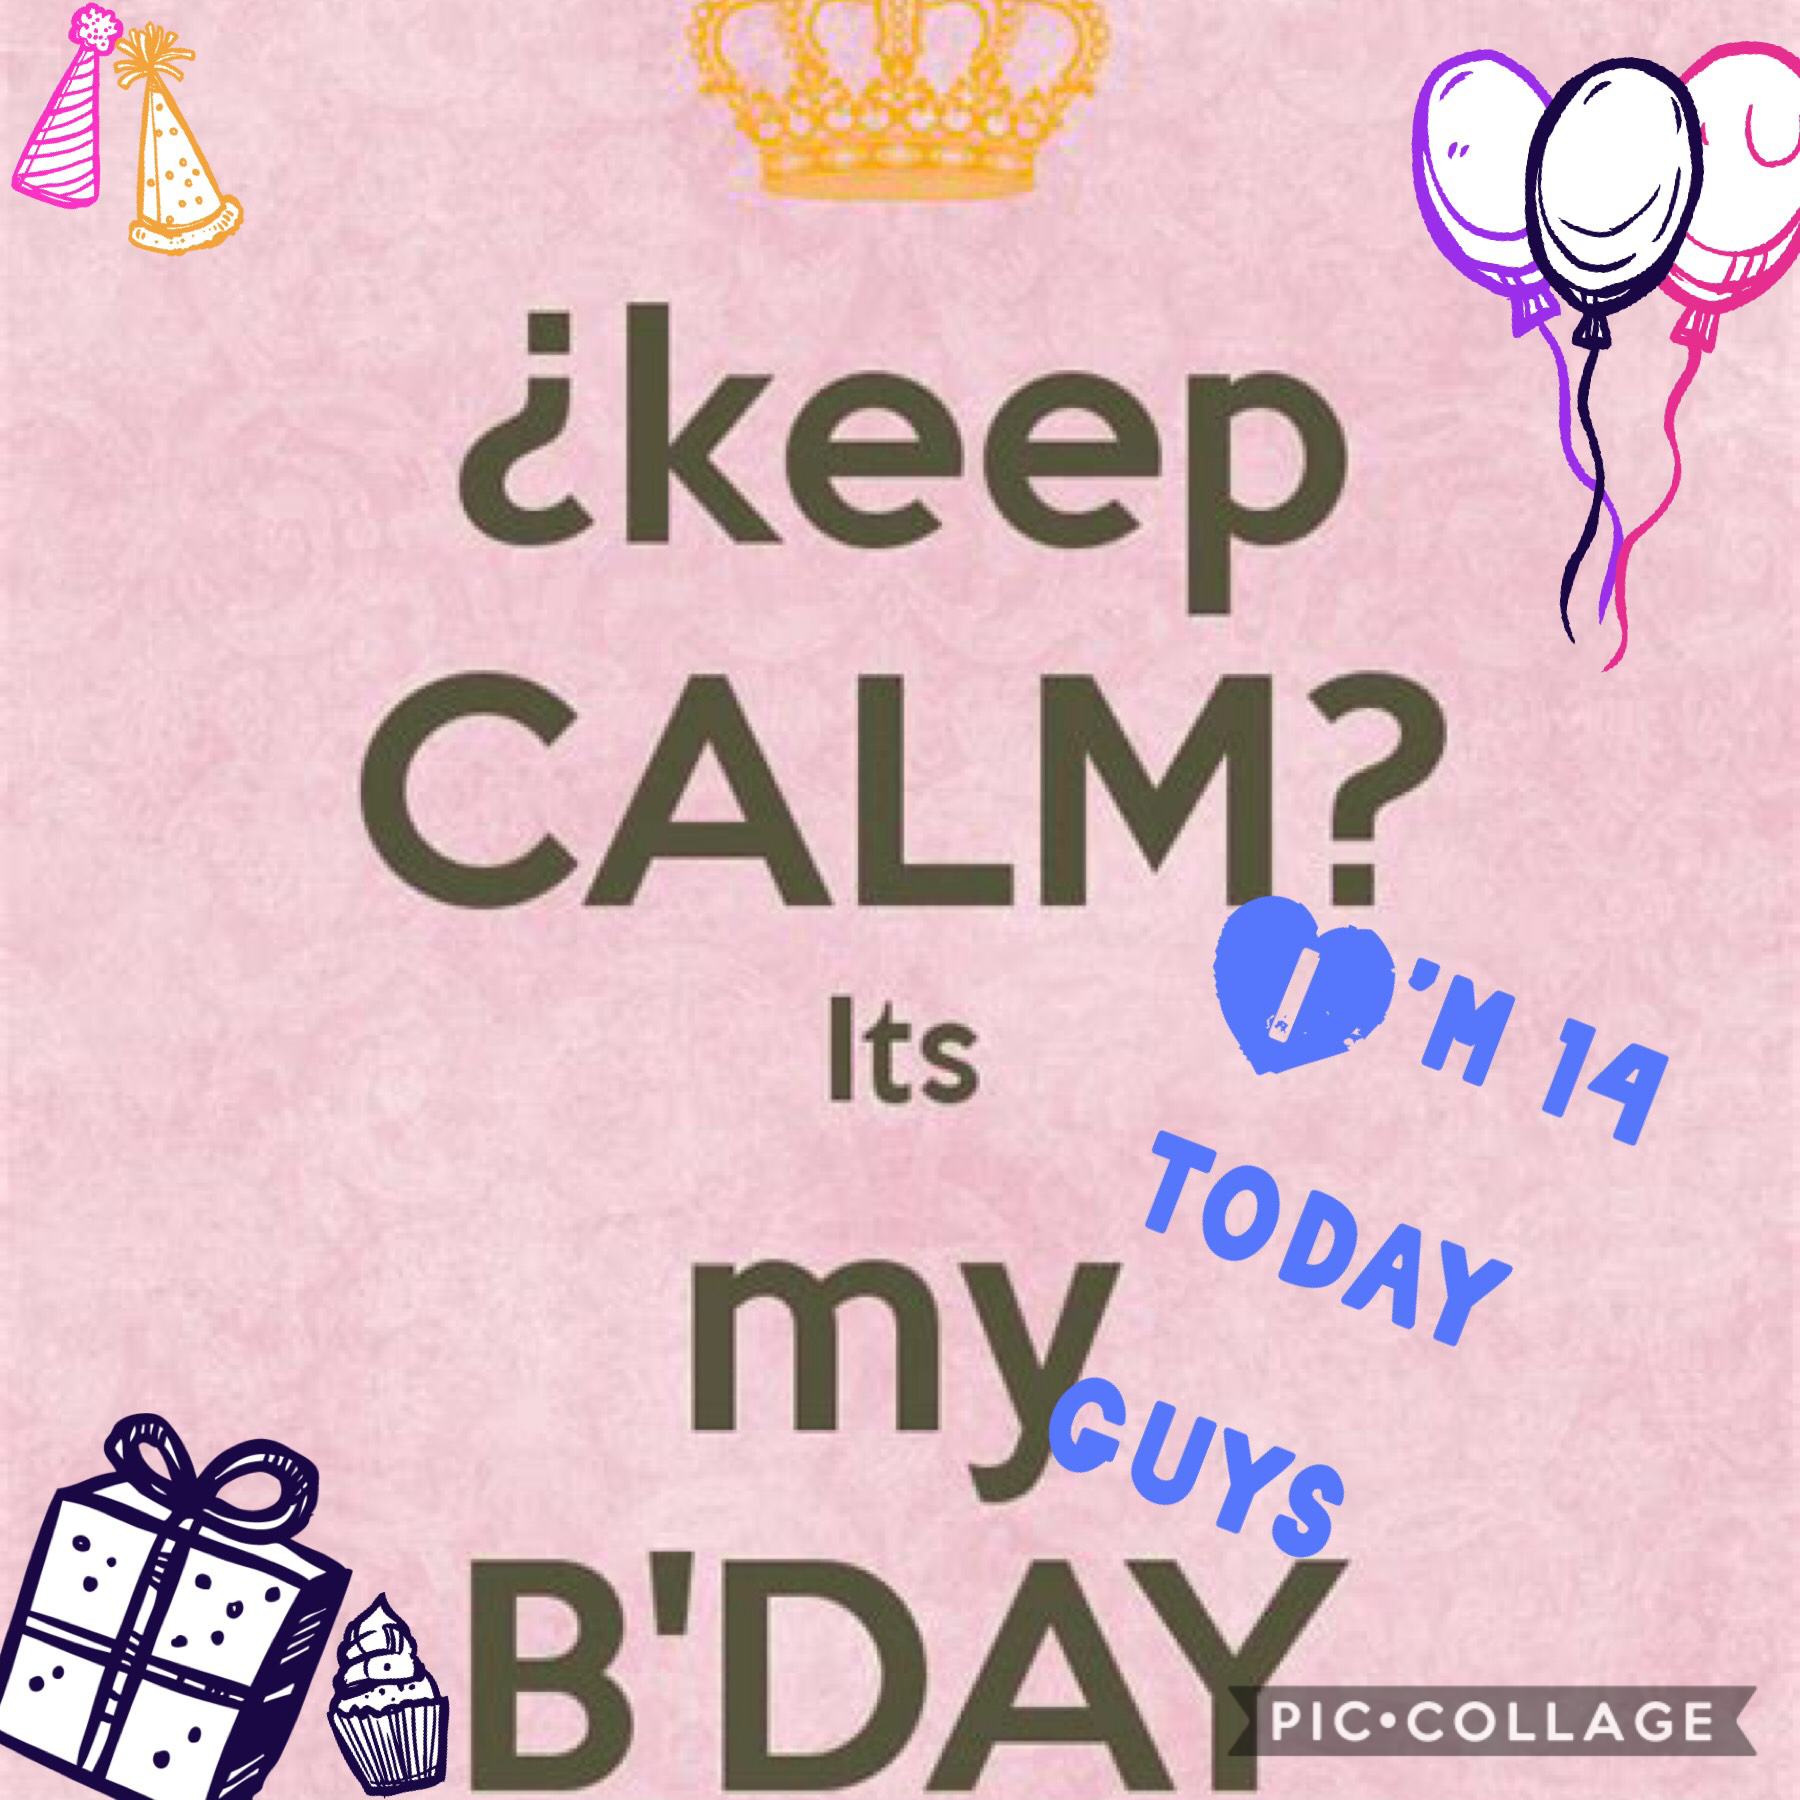 Keep calm it’s my b-day I’m 14 today guys